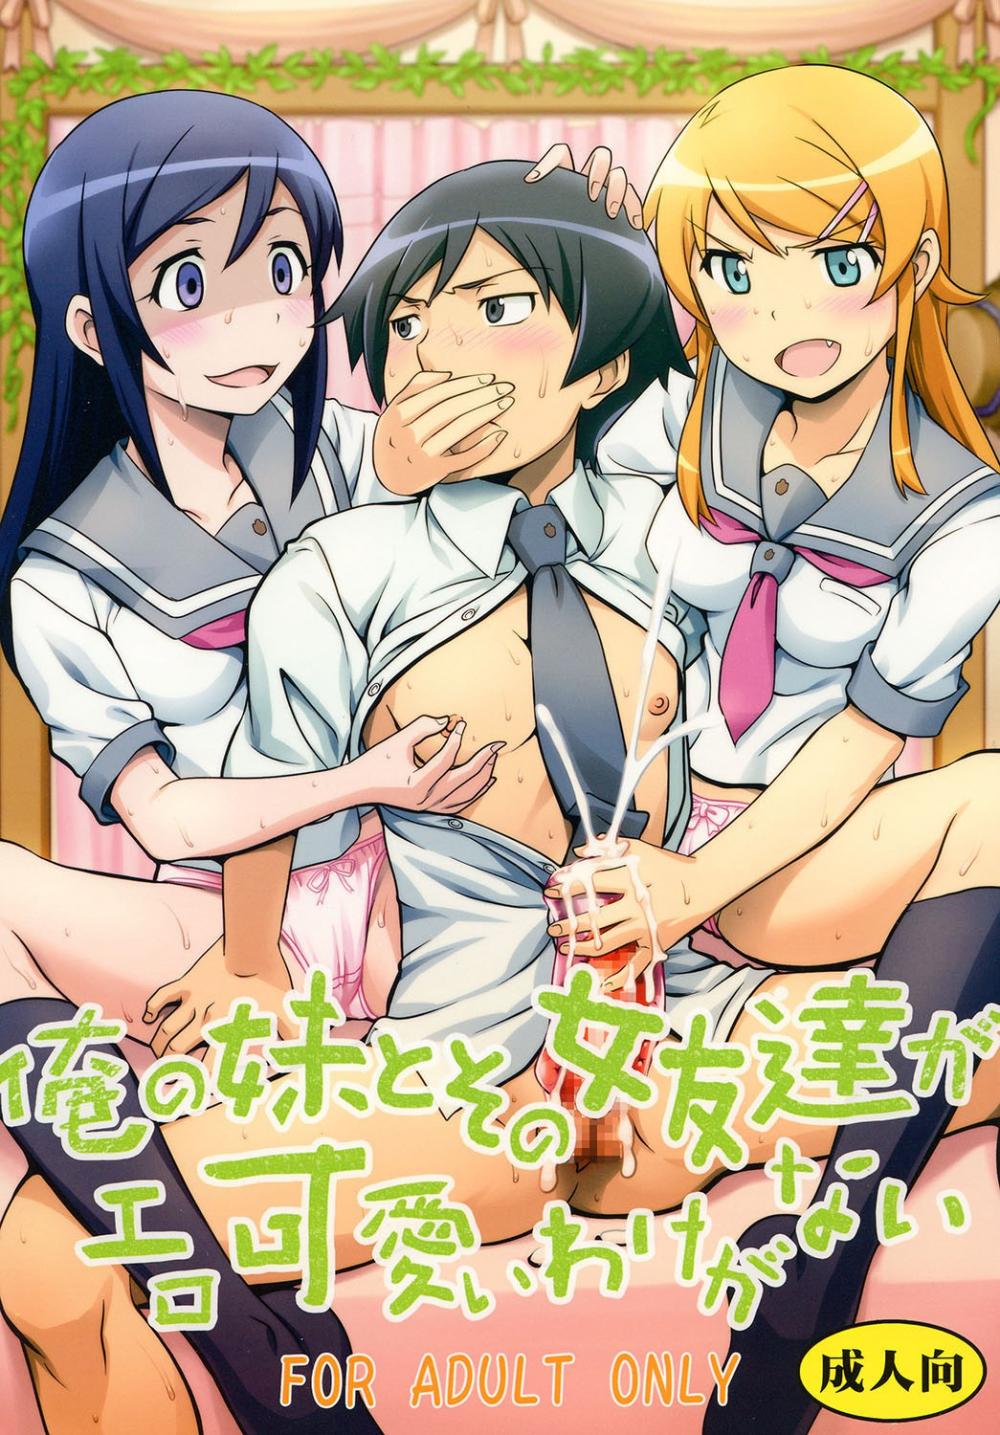 Hentai Manga Comic-My Little Sister and Her Friend Can't Be This Ero-Cute-Read-1